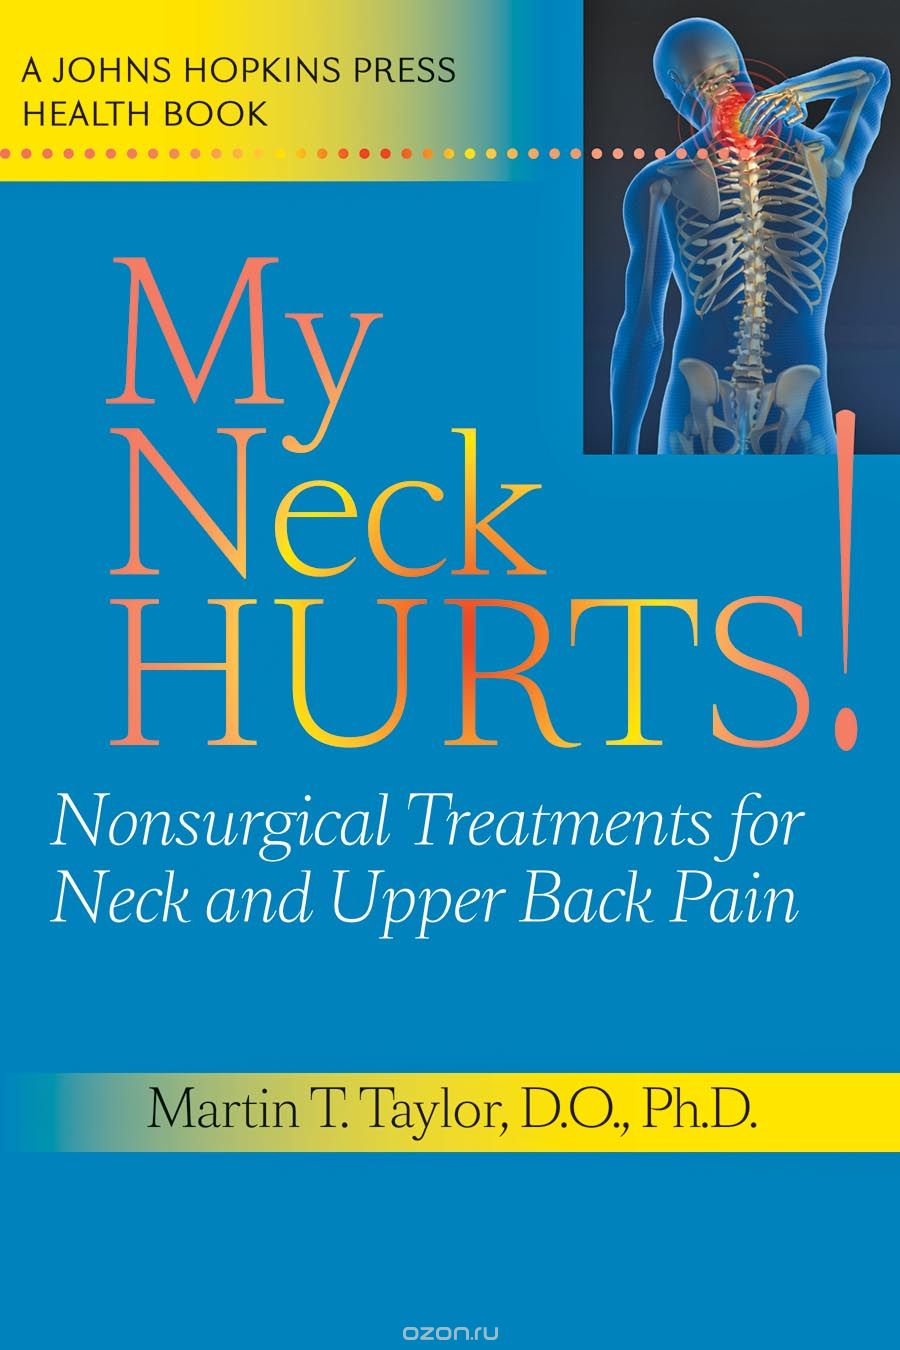 Скачать книгу "My Neck Hurts! – Nonsurgical Treatments for Neck and Upper Back Pain"